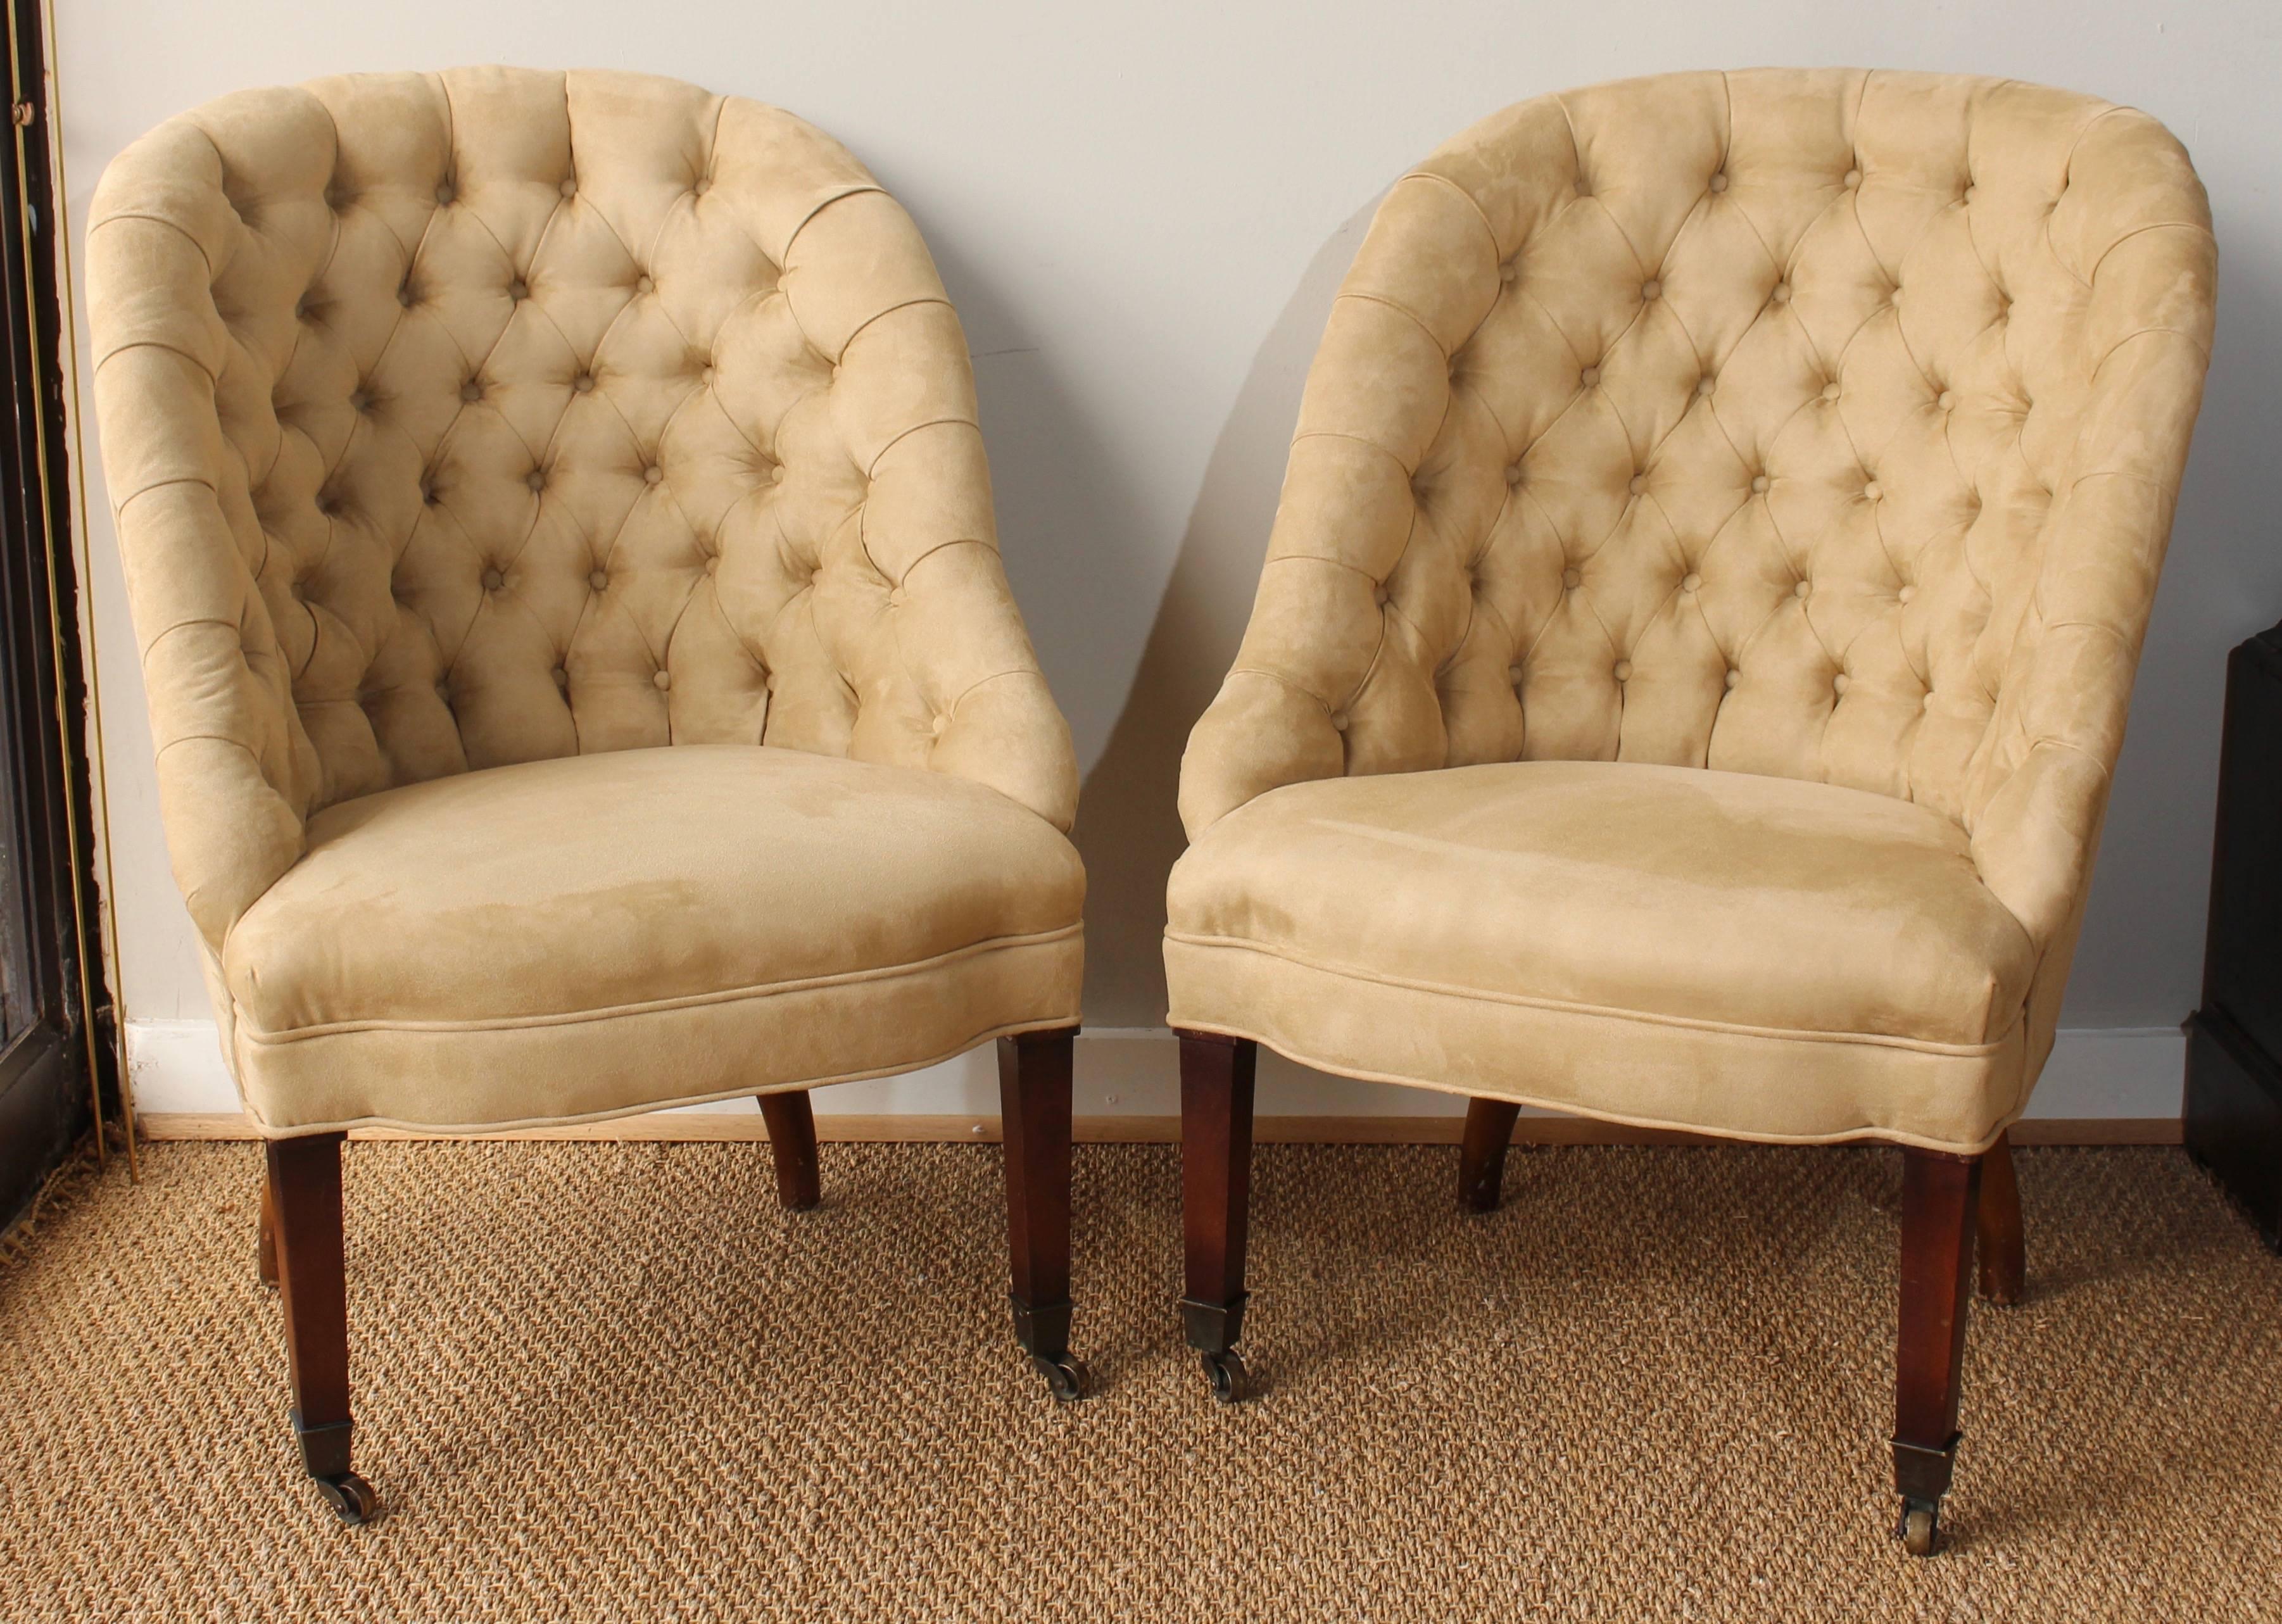 A pair of Regency style buttoned back slipper chairs newly upholstered in buff colored ultrasuede.